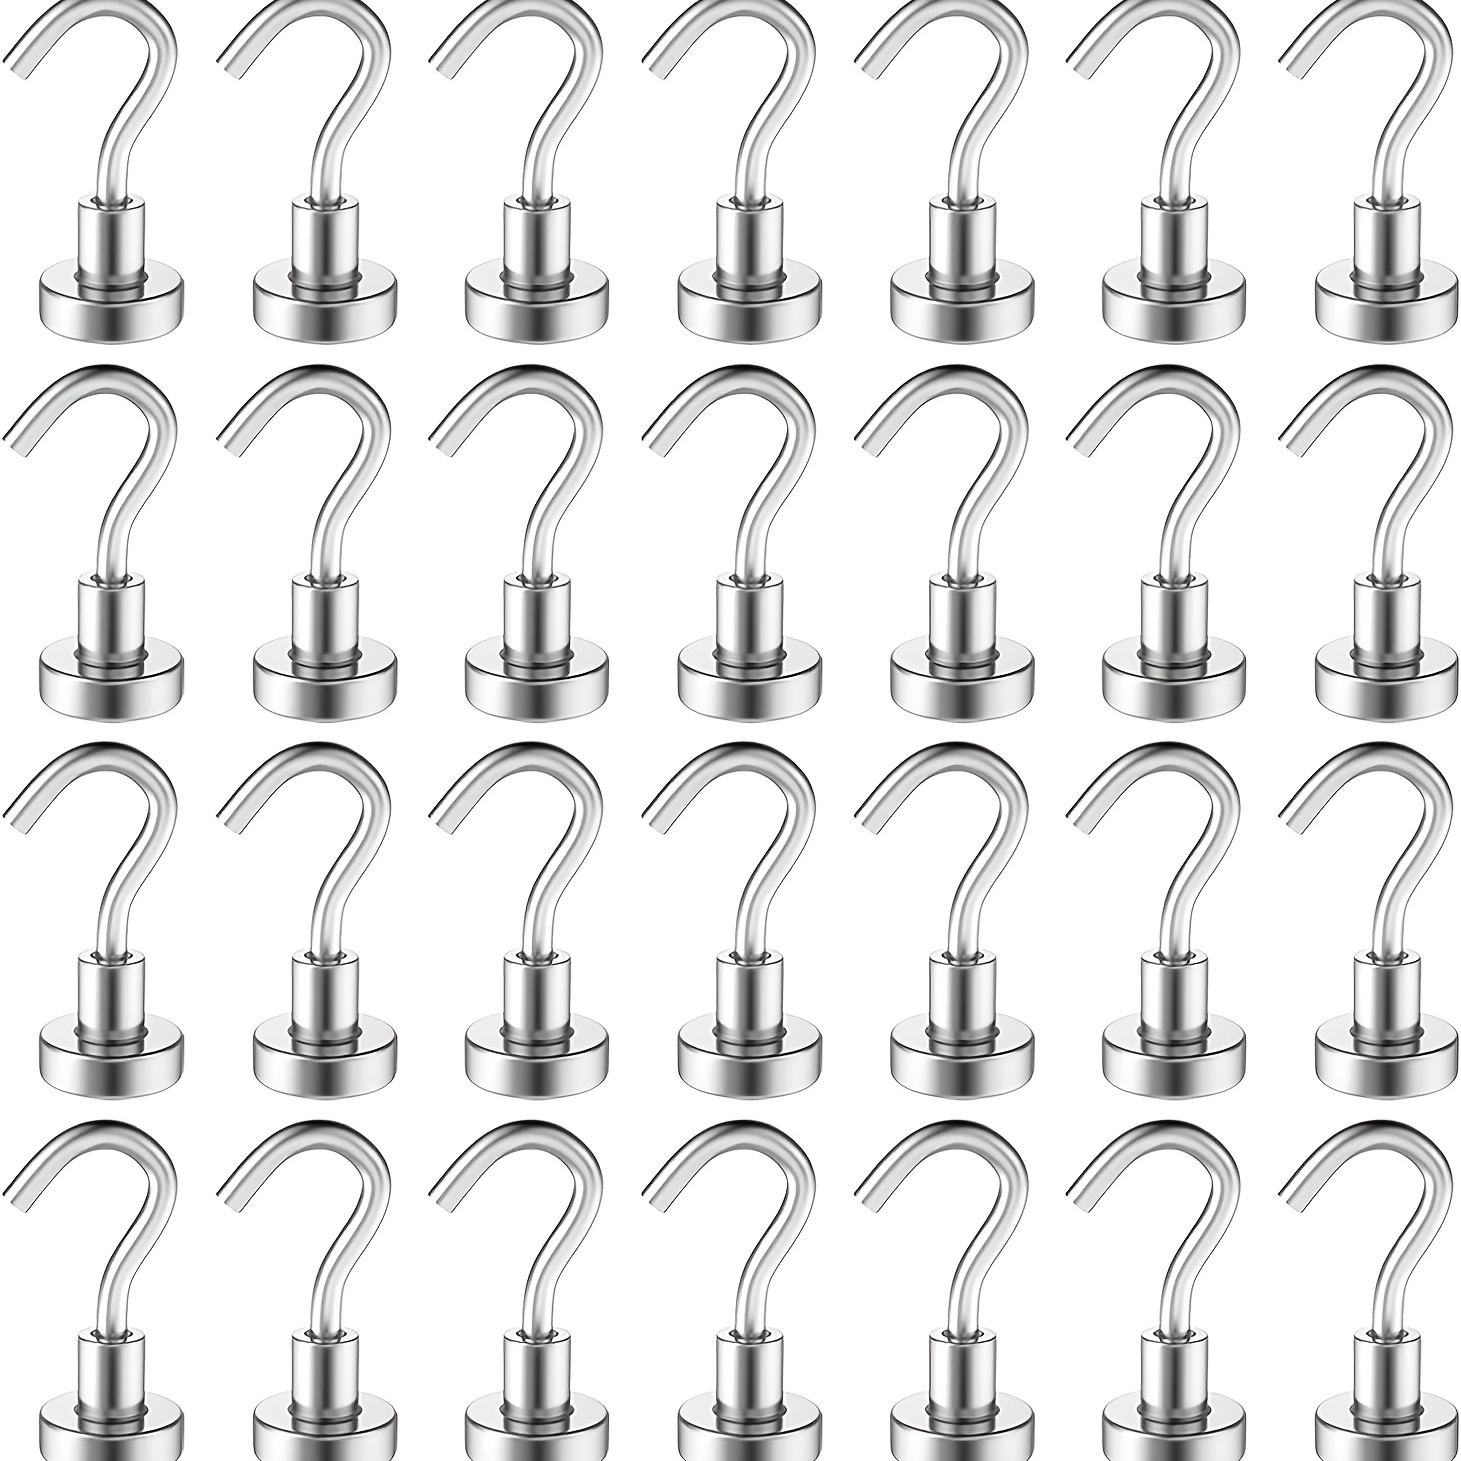 28pcs Heavy Duty Magnetic Hooks, 25 Lbs Rare Earth Neodymium Magnet Hooks  For Hanging Kitchen, Office, Garage, Grill, Home, Wall Hooks, Heavy Duty Mag